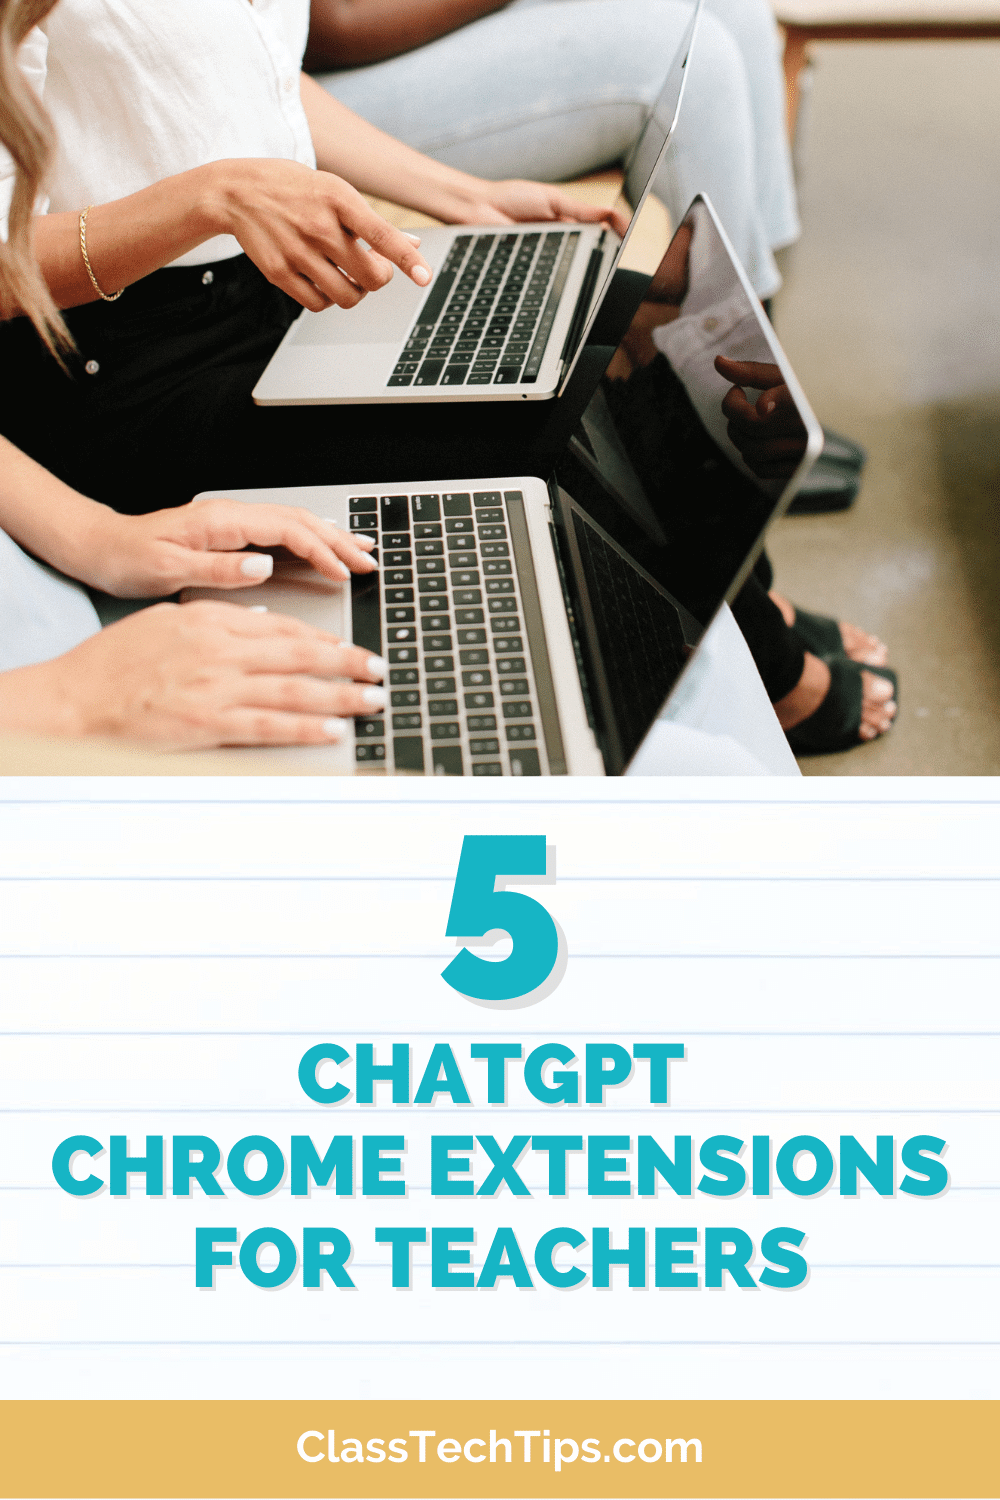 Featured image showcasing the creative and useful ChatGPT Chrome Extensions for Teachers to enrich the teaching experience